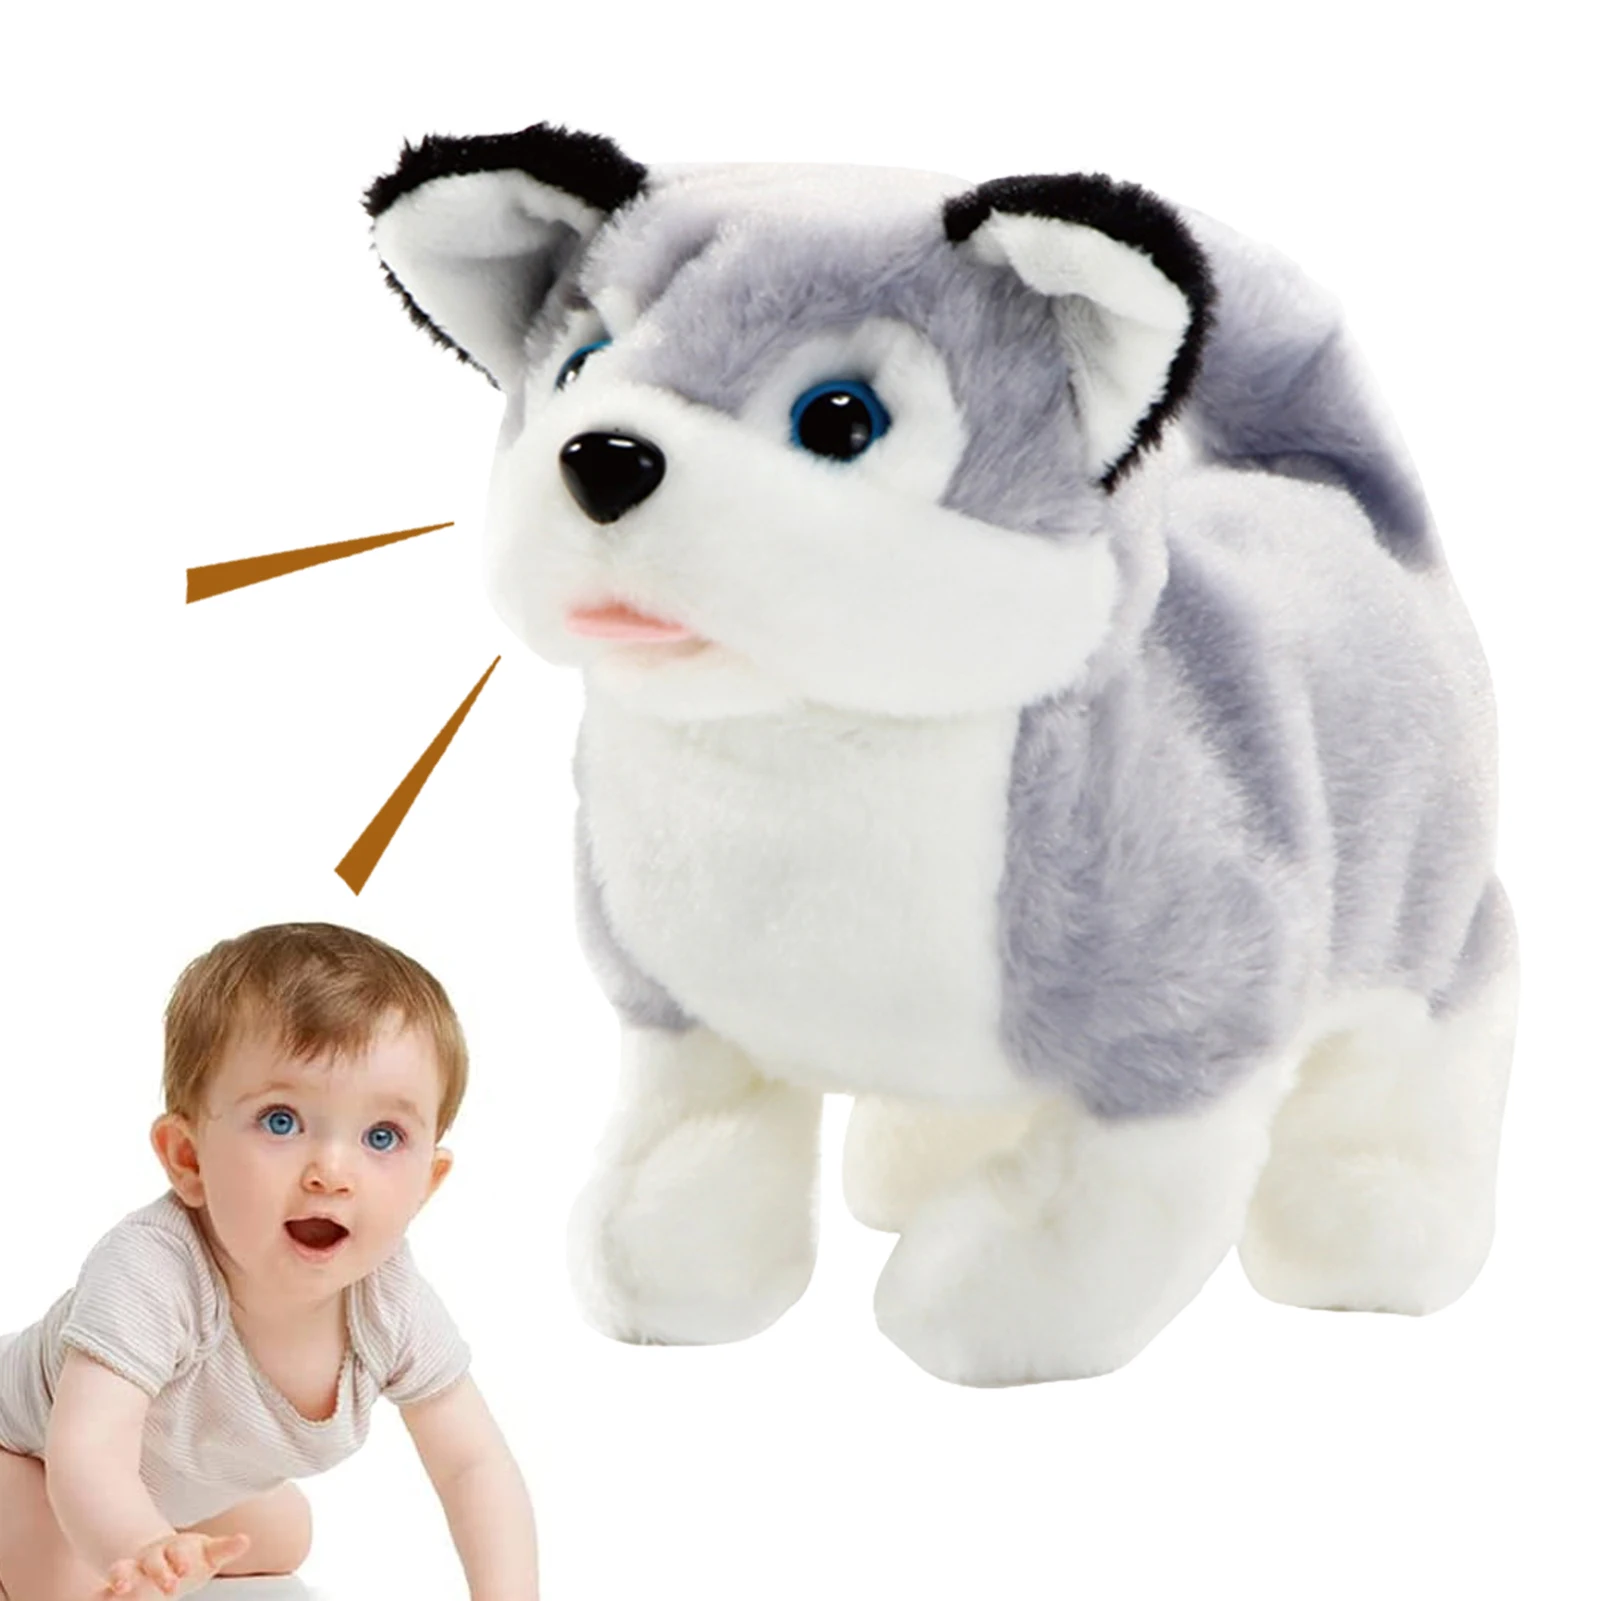 

Talking Plush Dog Walking Toy Dog Walking And Barking Pet Realistic Stuffed Puppy Animal Dogs Funny Birthday Gifts For Boys And